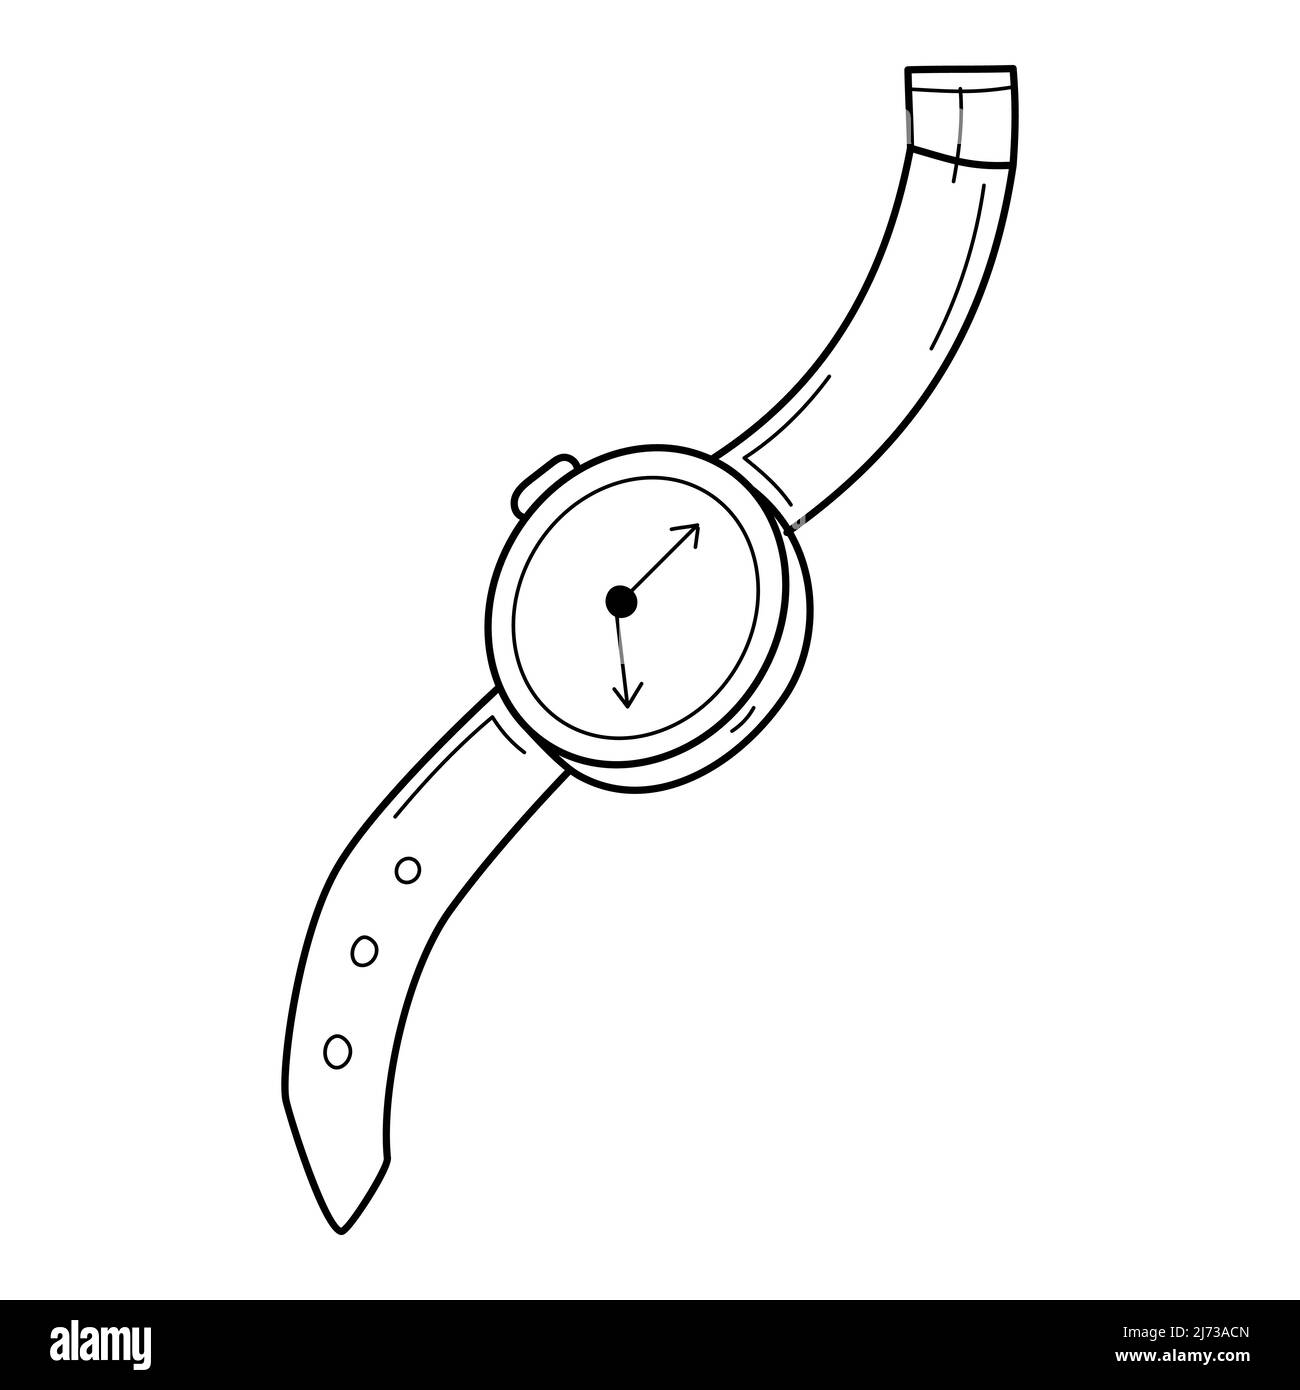 A wrist watch with a strap. Doodle style. Hand-drawn black and white vector illustration. The design elements are isolated on a white background Stock Vector